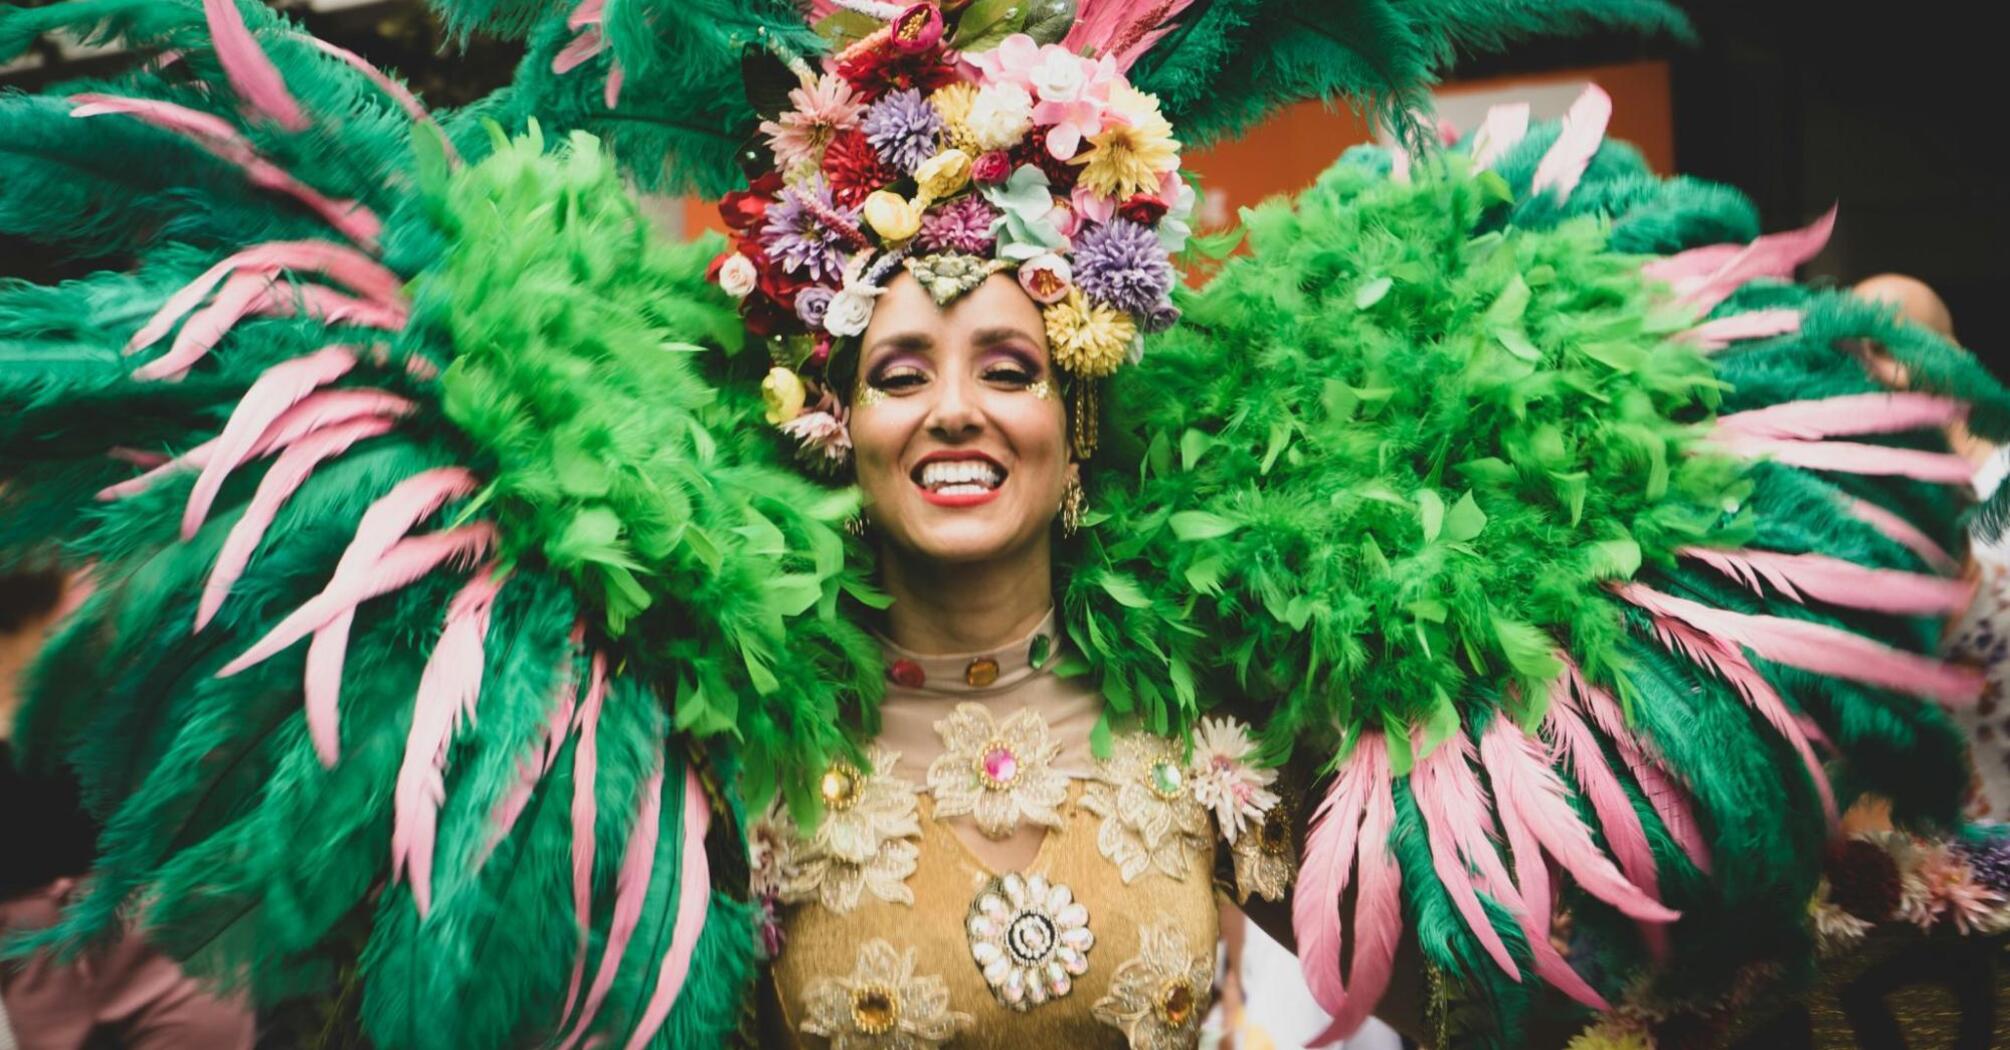 A woman in a bright carnival costume with green and pink feathers